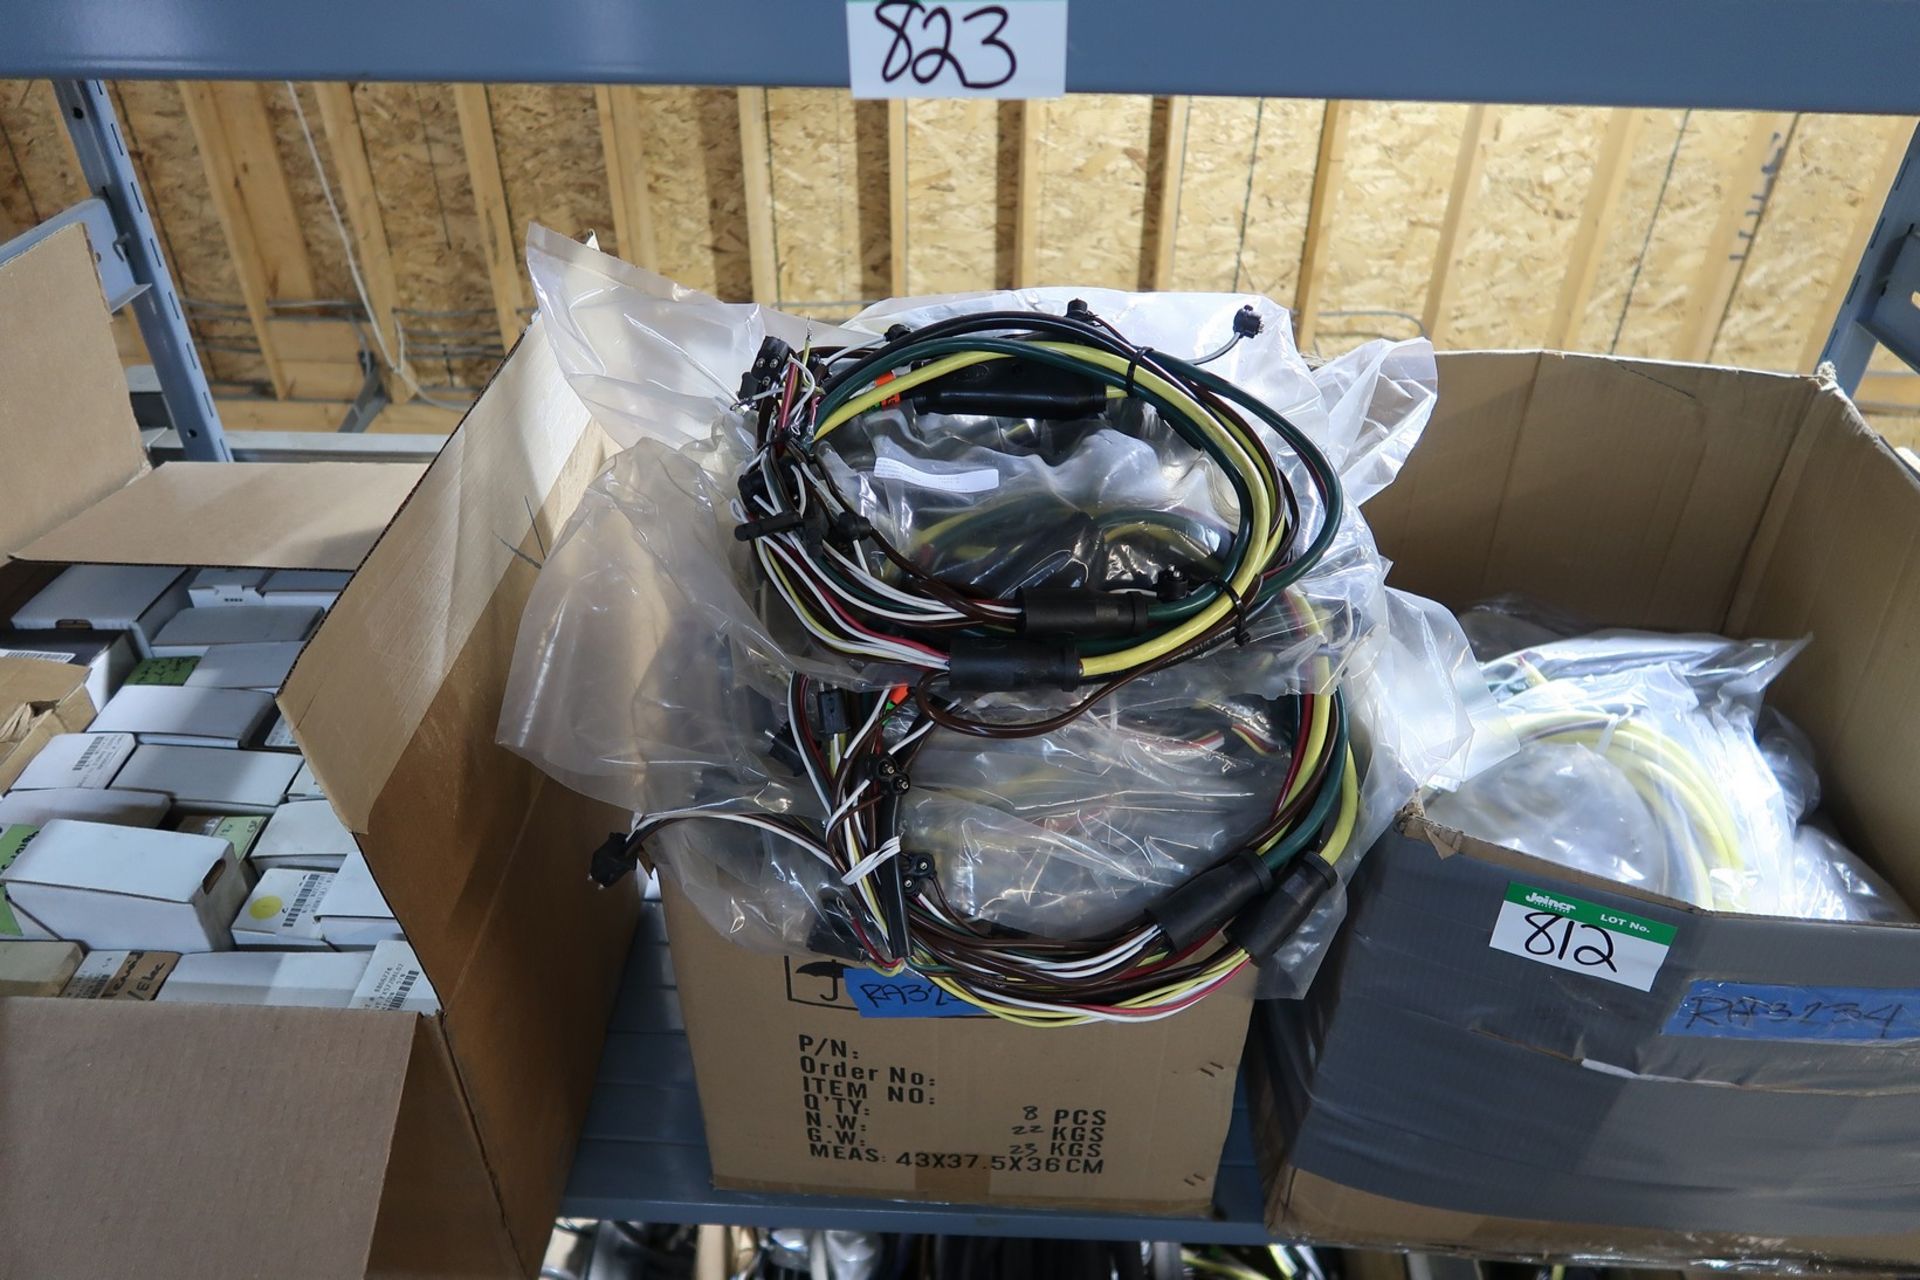 LOT OF ASST'D WIRE HARNESSES, FILERS ETC. (CONTENTS ONLY) - Image 2 of 3